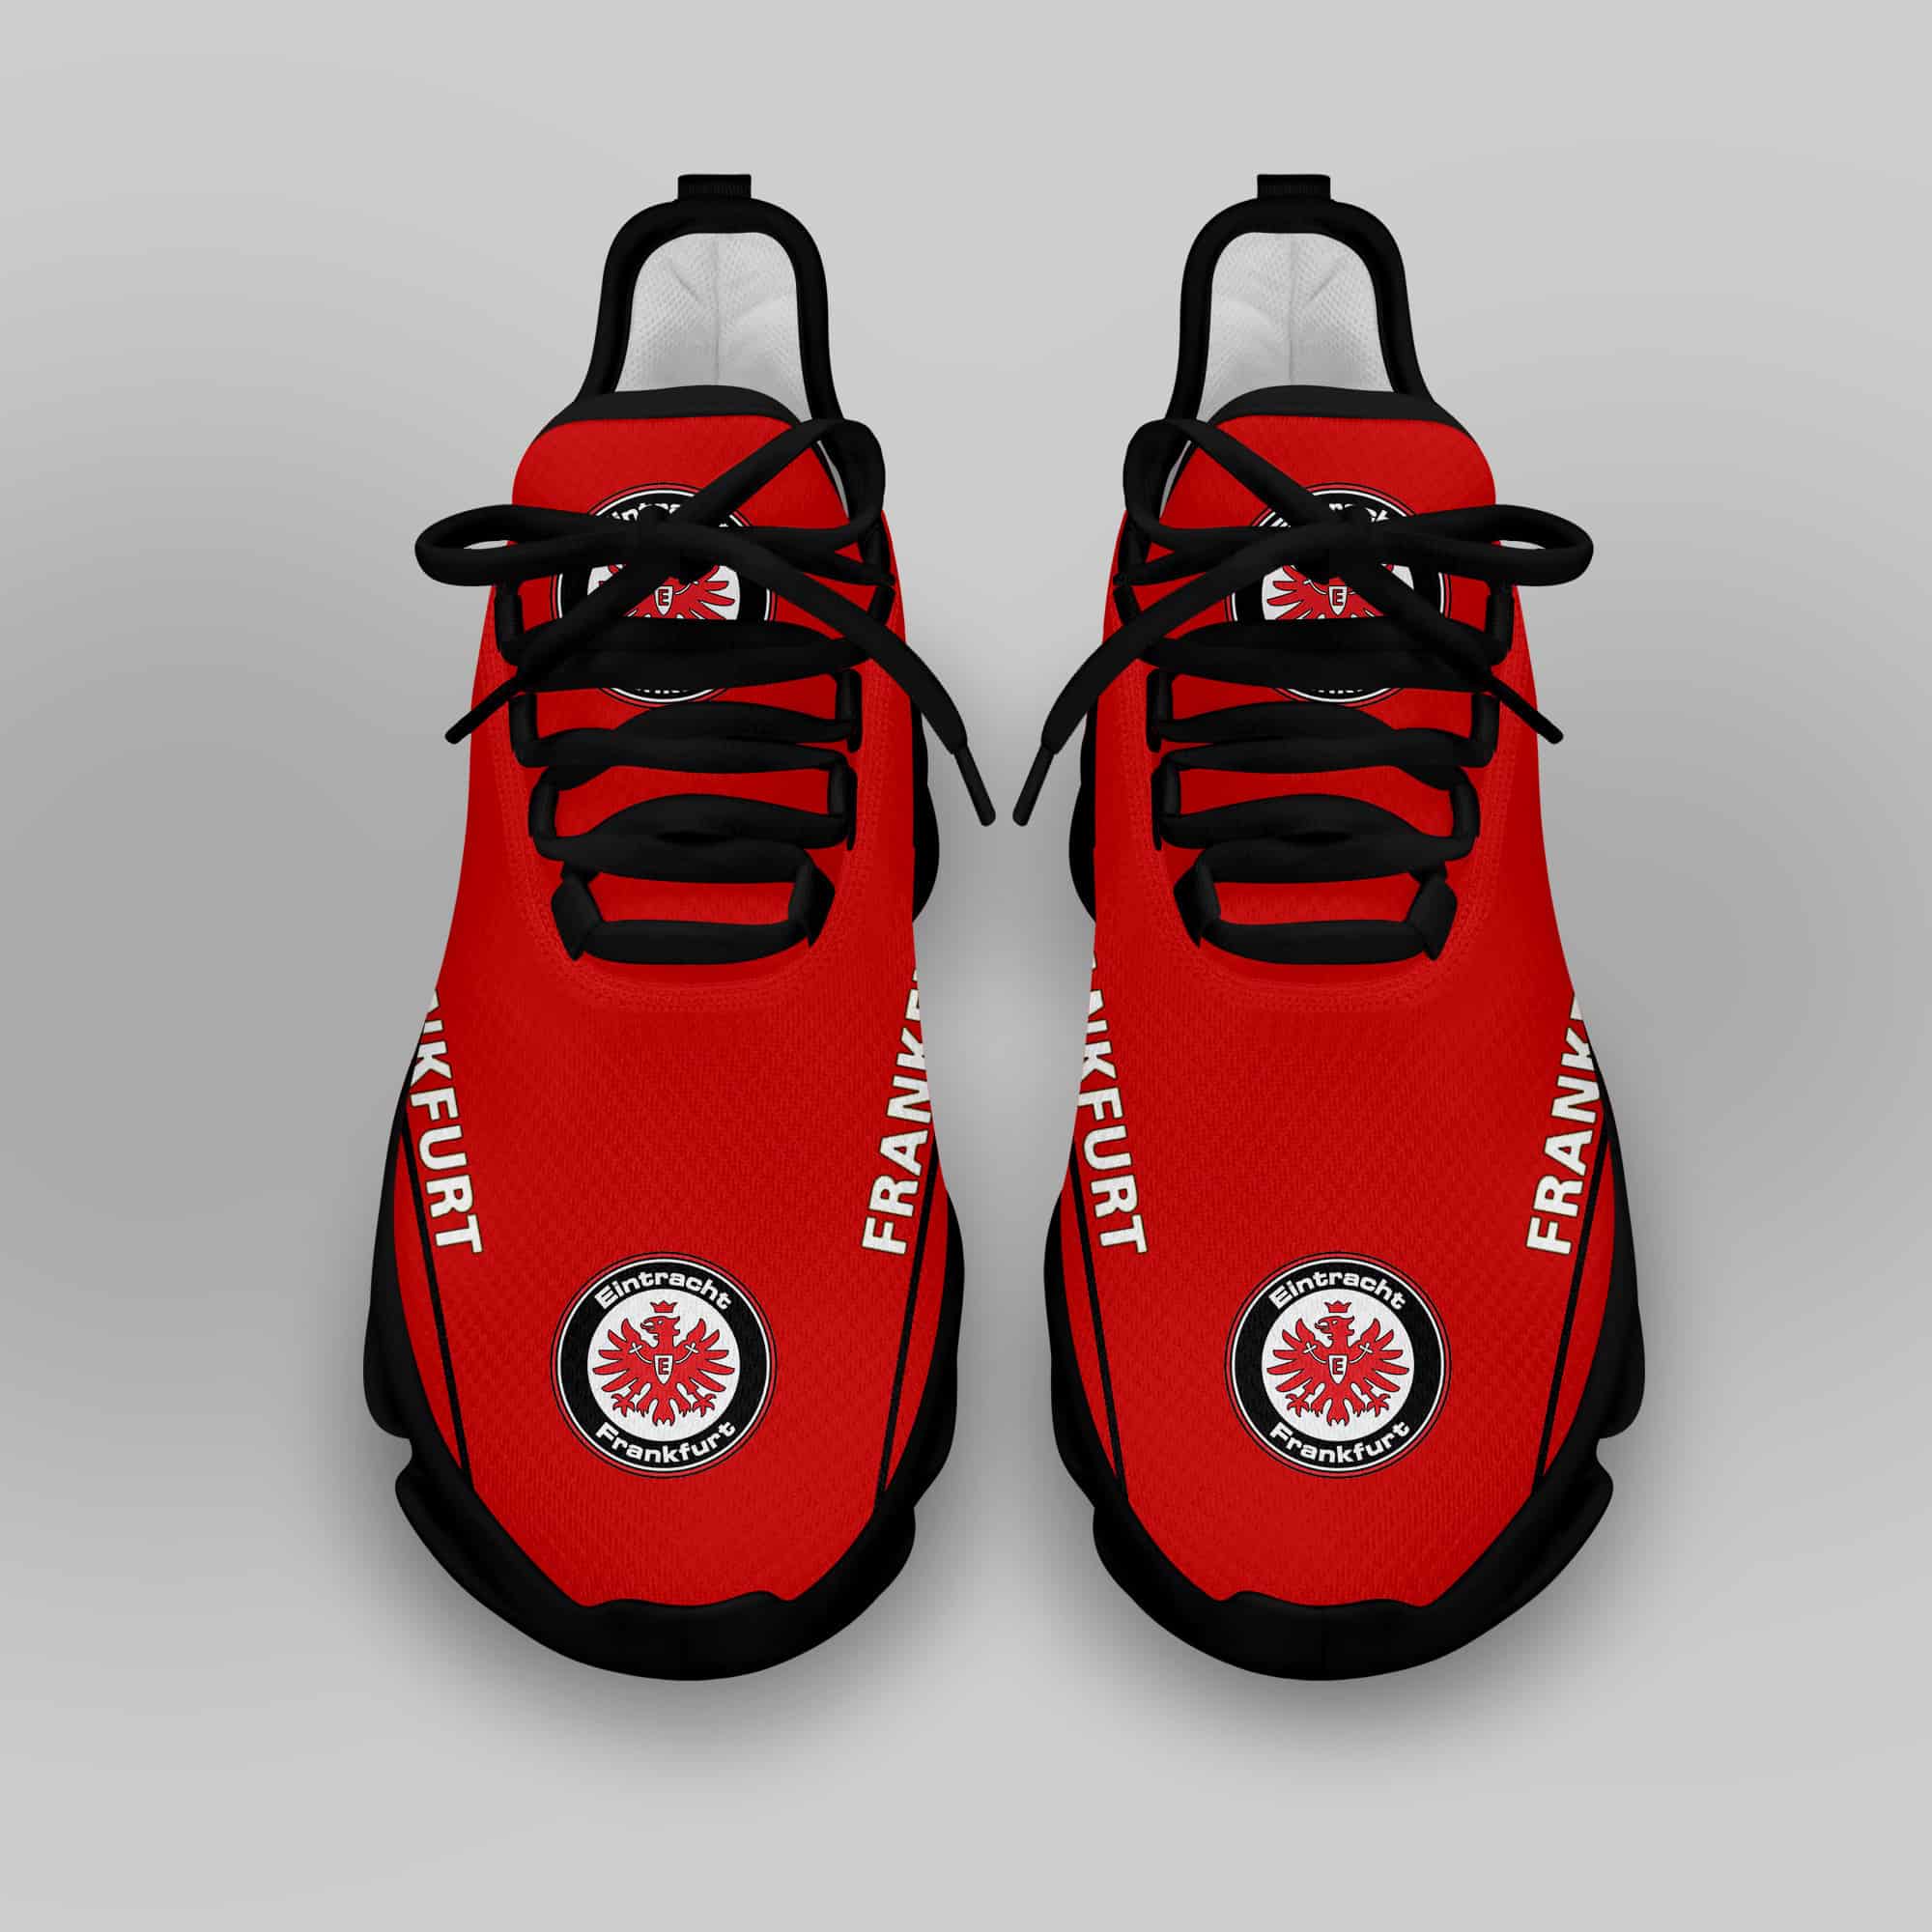 Eintracht Frankfurt Running Shoes Max Soul Shoes Sneakers Ver 11 4